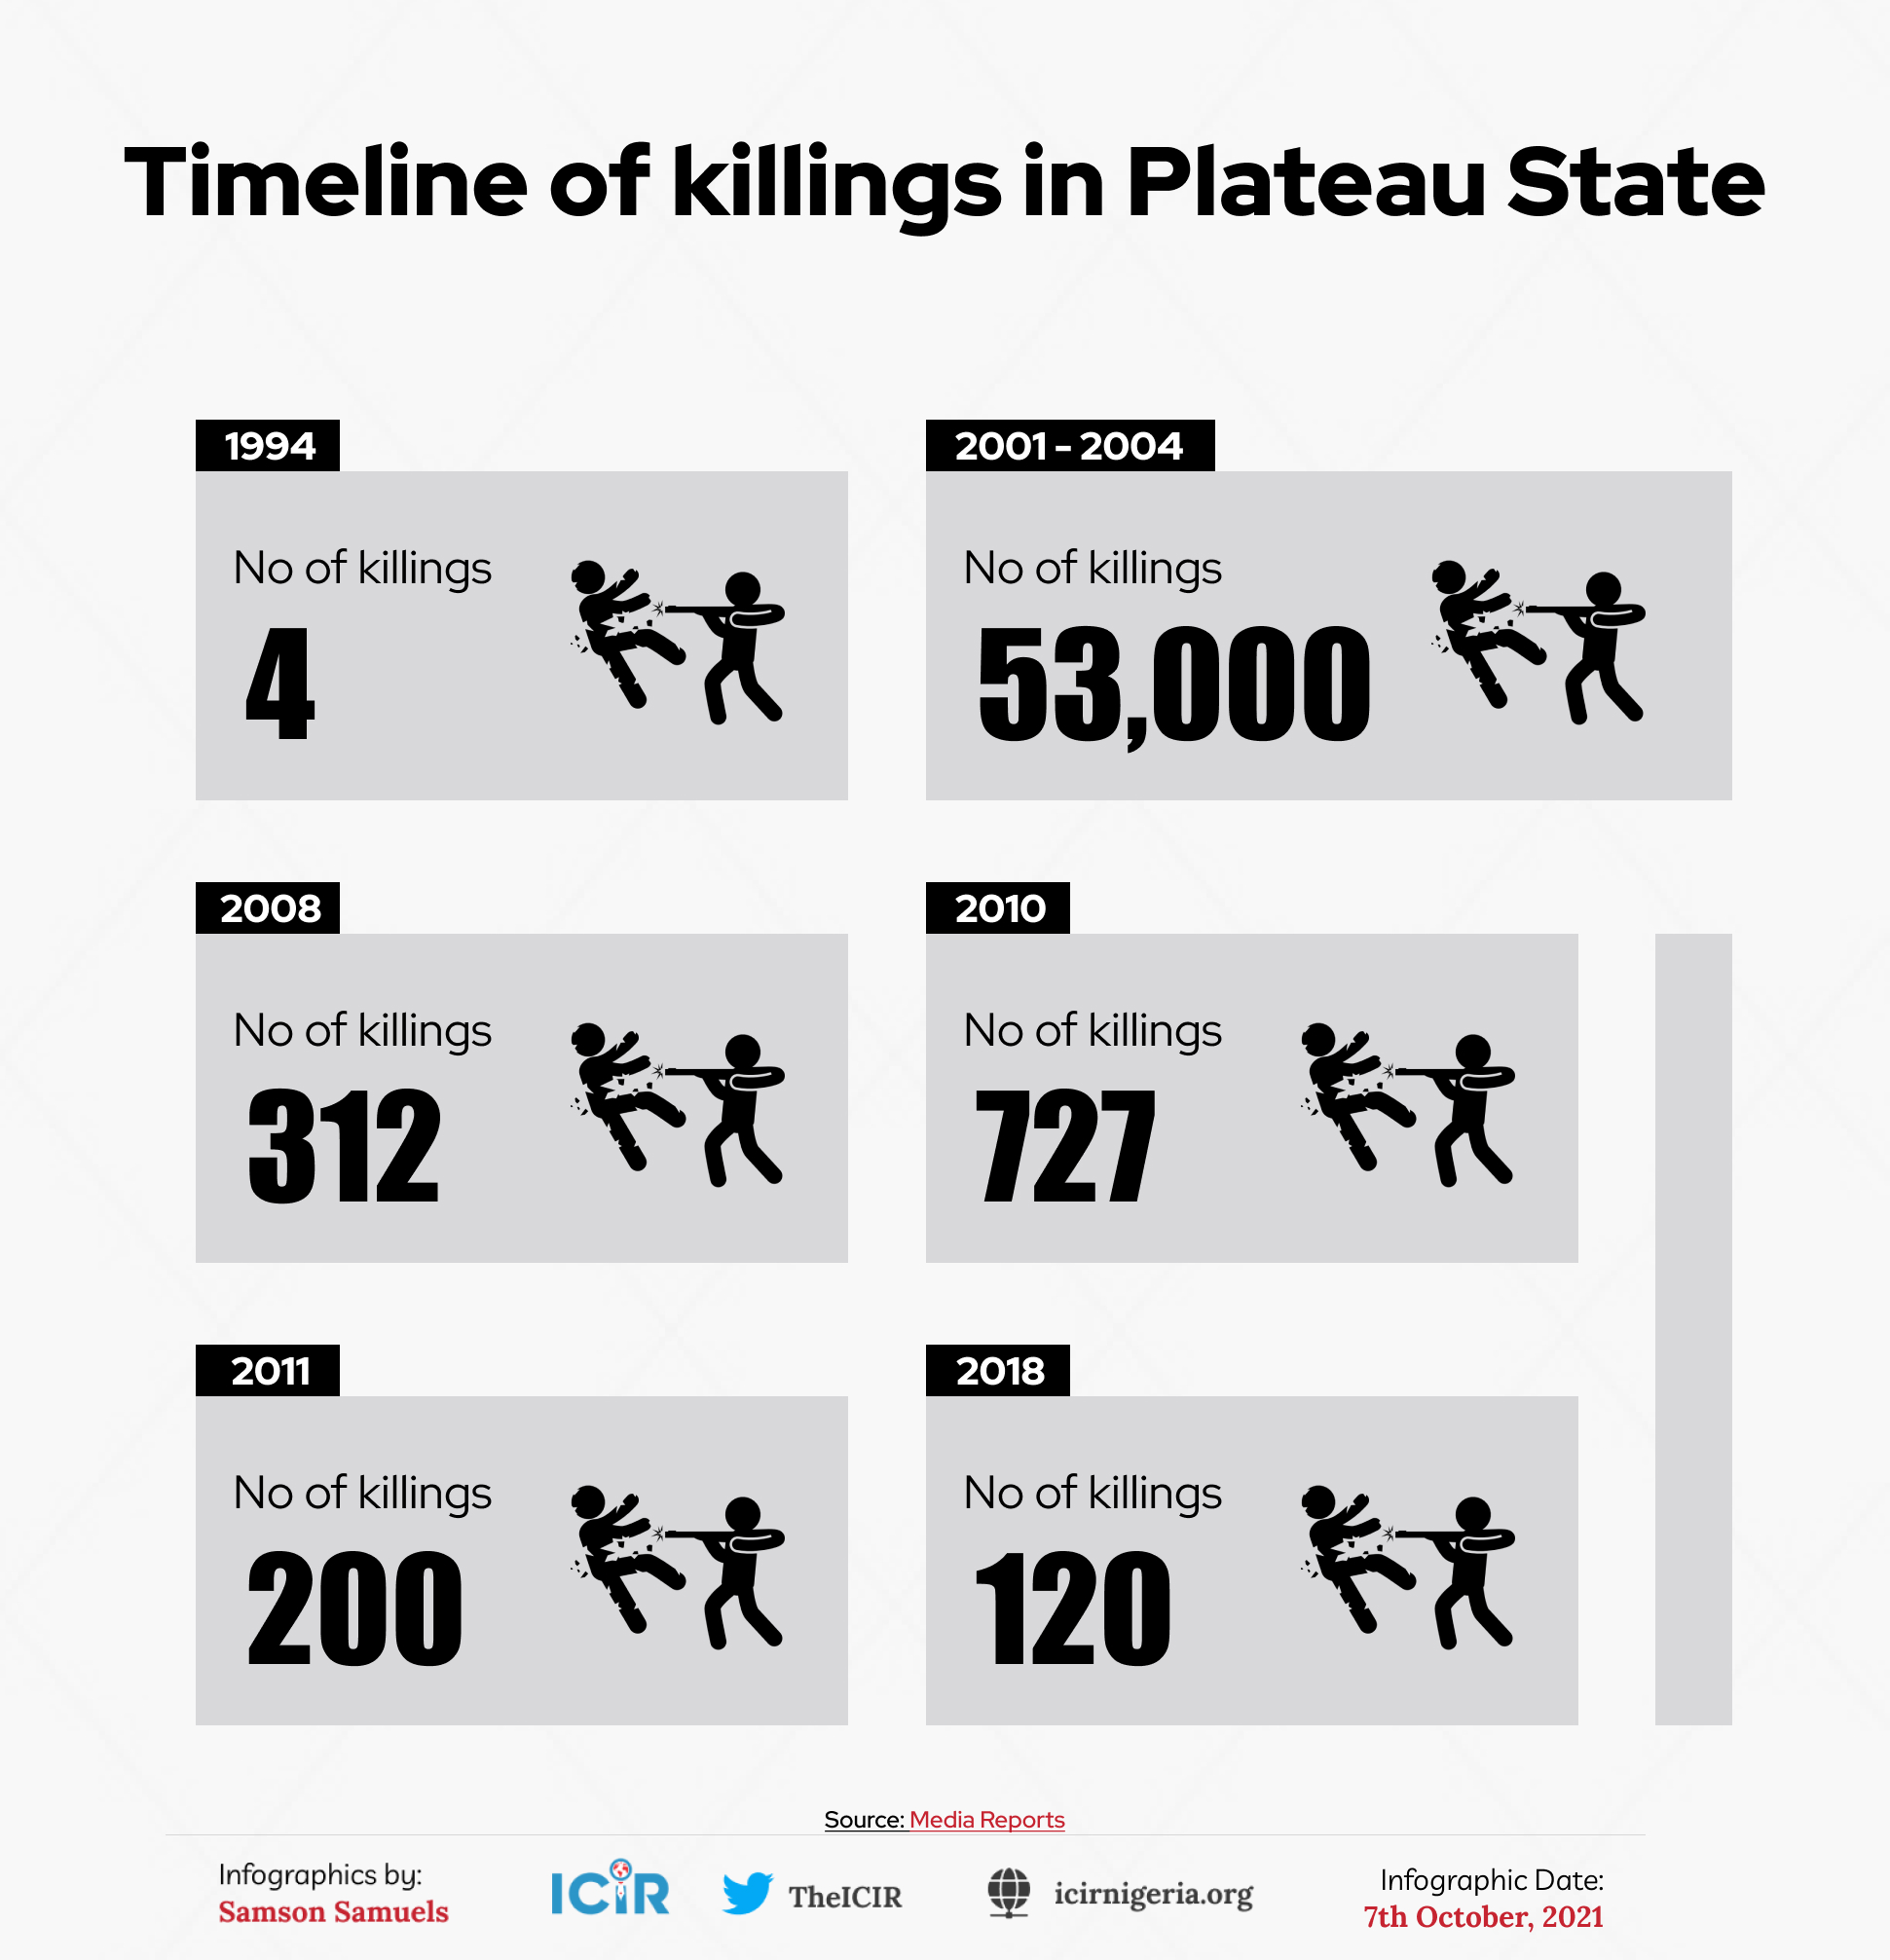 Timeline of killings in Plateau State